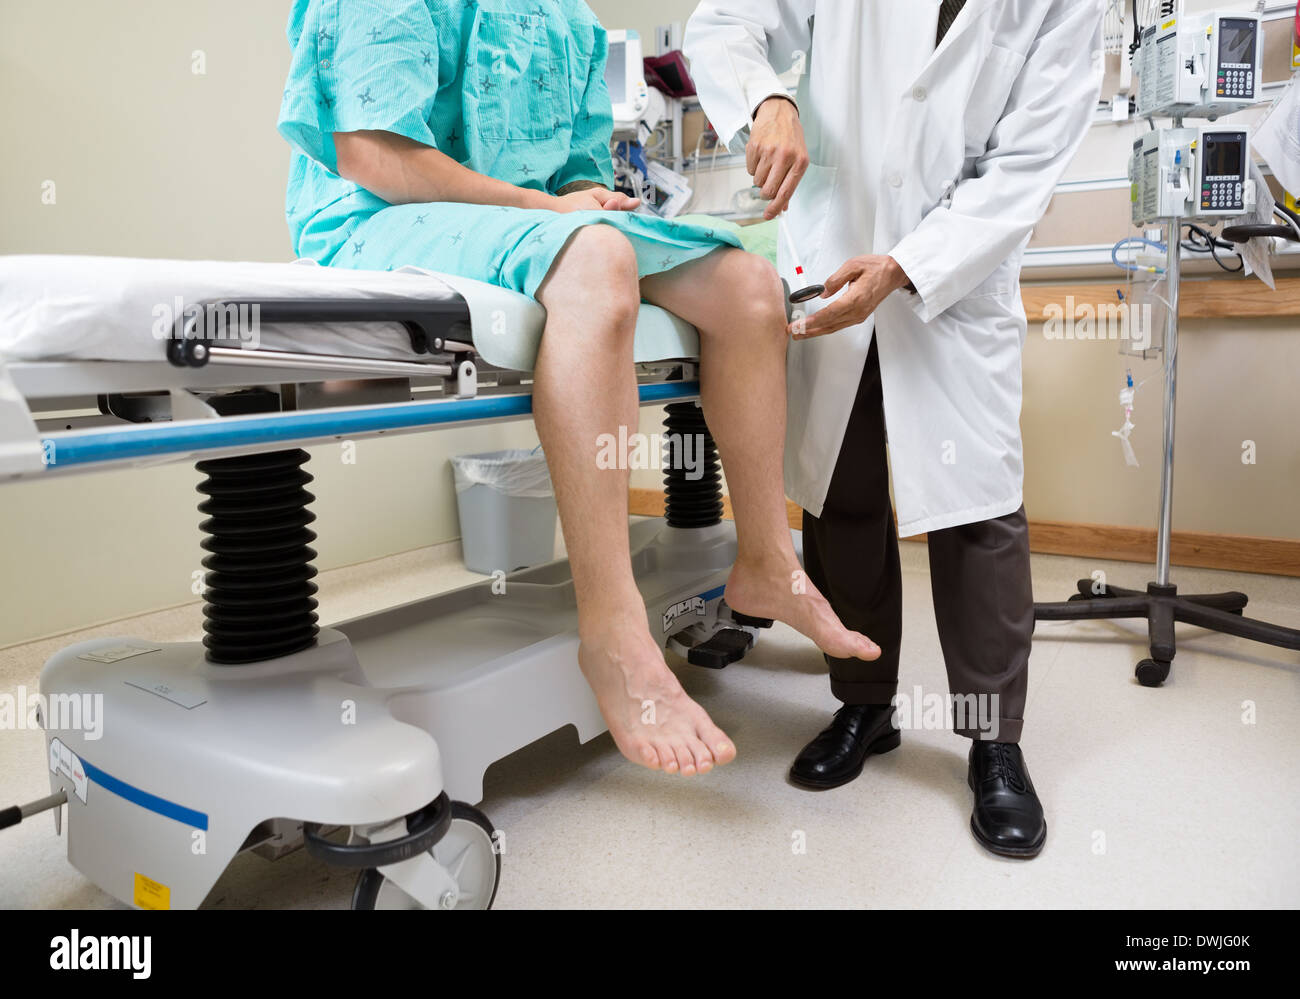 Neurologist Examining Patient's Knee With Hammer In Hospital Stock Photo